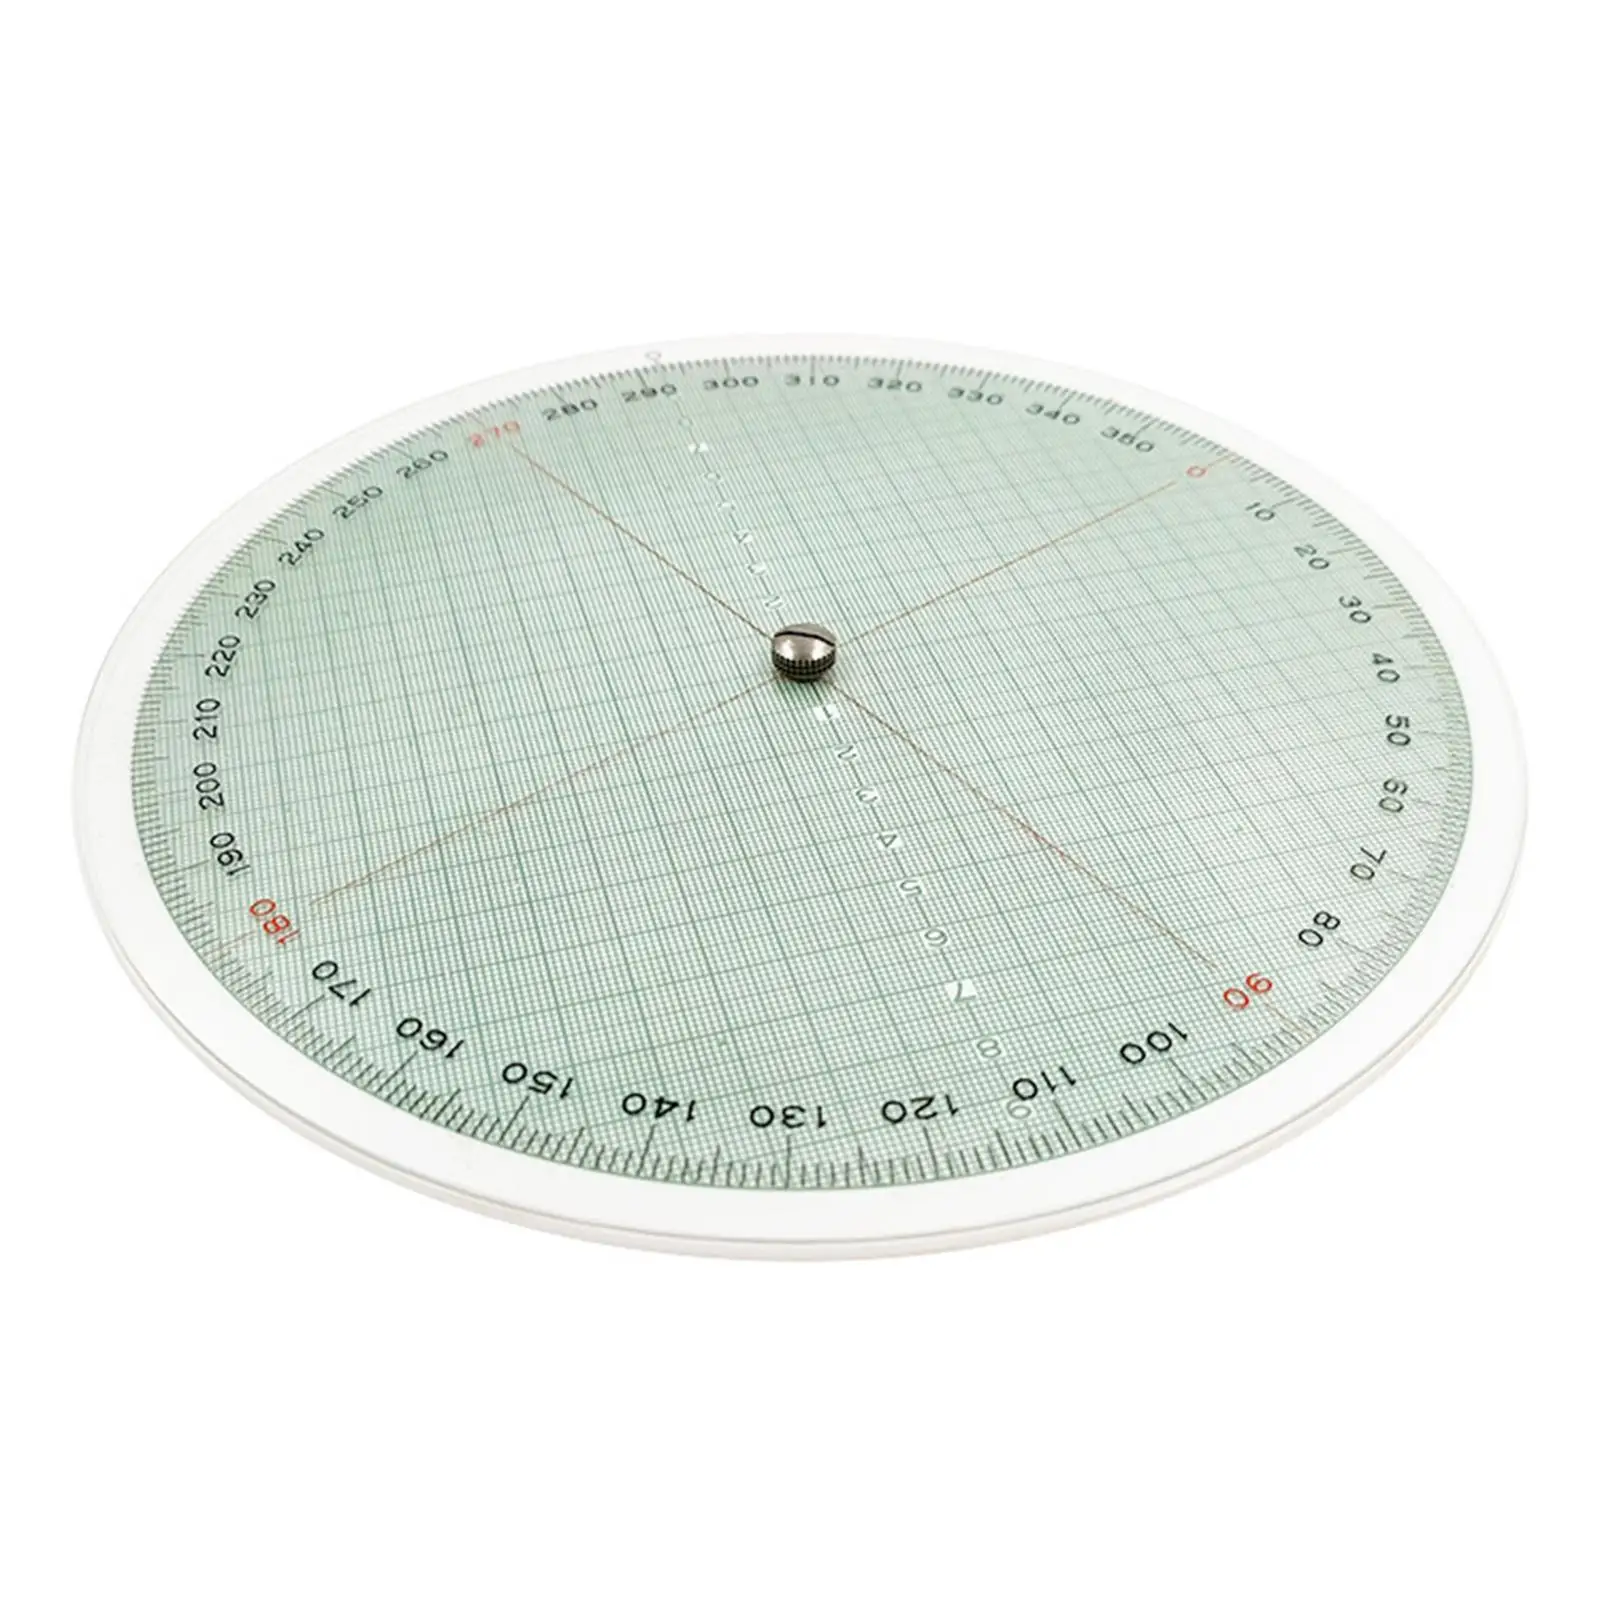 Nautical Slide Rule Supplies Portable Stable Simple to Use Durable Lightweight Slide Rule Calculator Sailing Circular Ruler